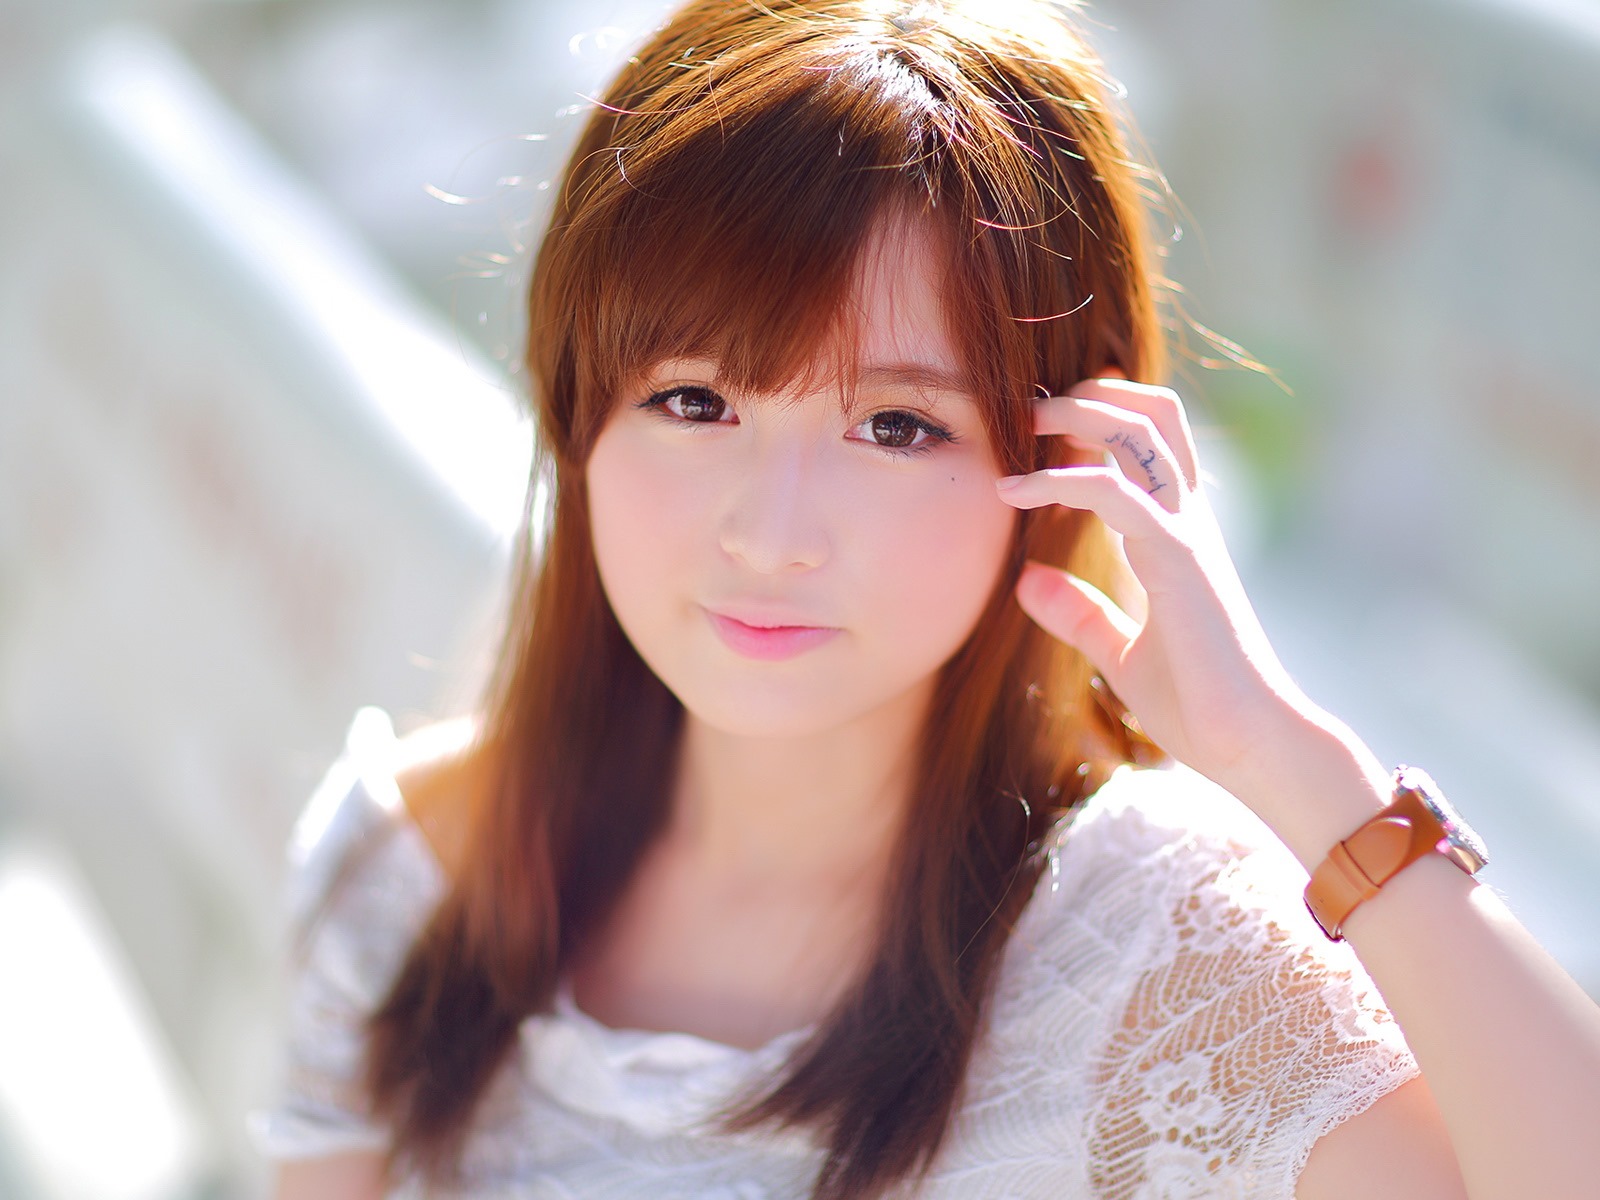 Pure and lovely young Asian girl HD wallpapers collection (2) #36 - 1600x1200